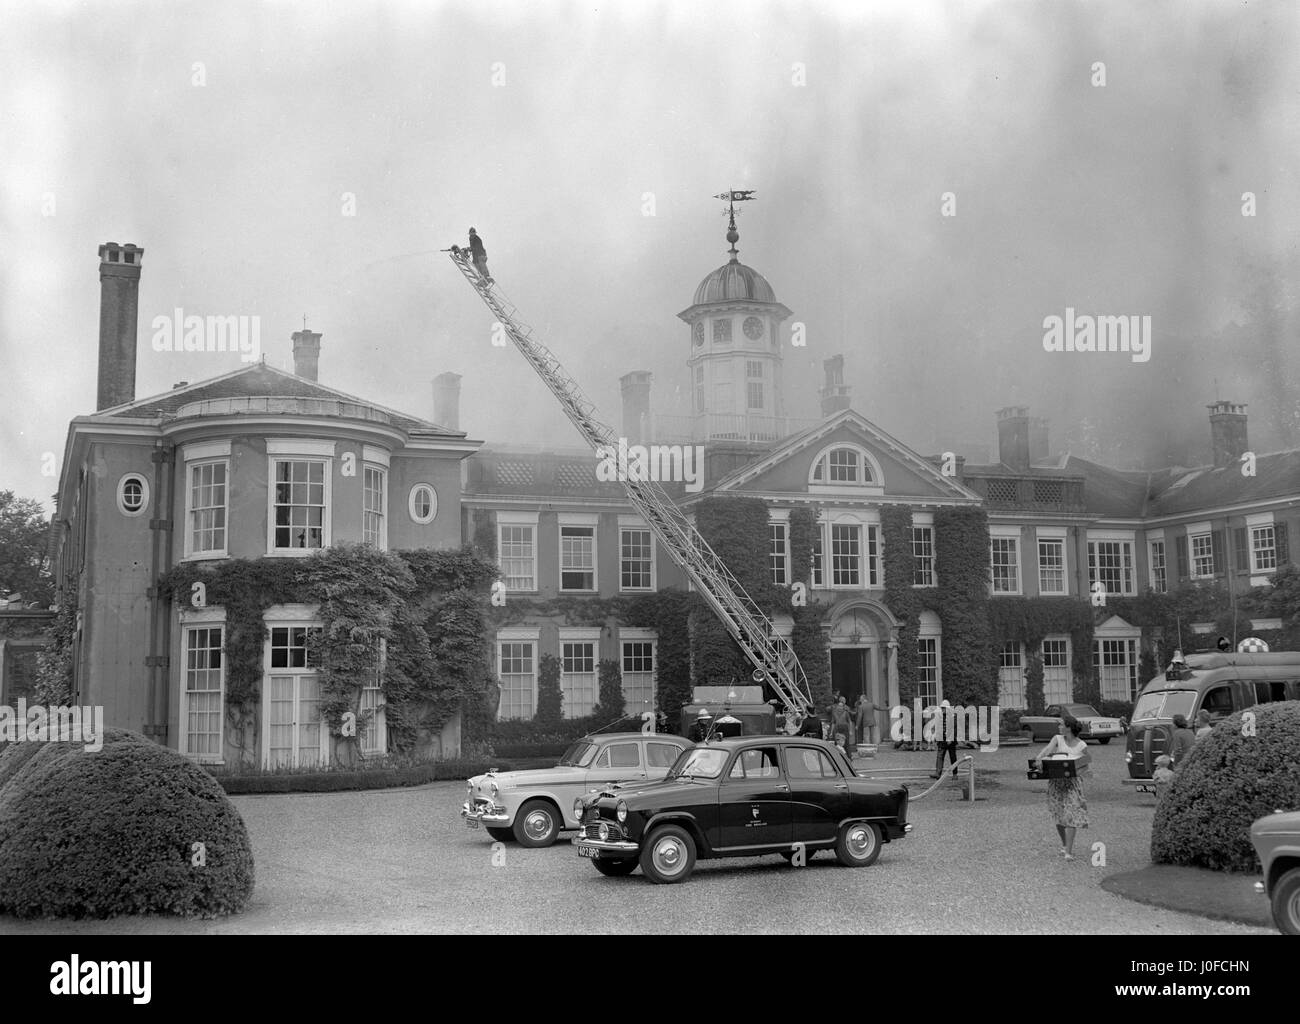 Polesden Lacey, near Dorking, Surrey, when fire broke out in the roof. A total of 22 jets, 10 breathing apparatus sets and a turntable ladder were rushed to the scene from across Surrey. Stock Photo